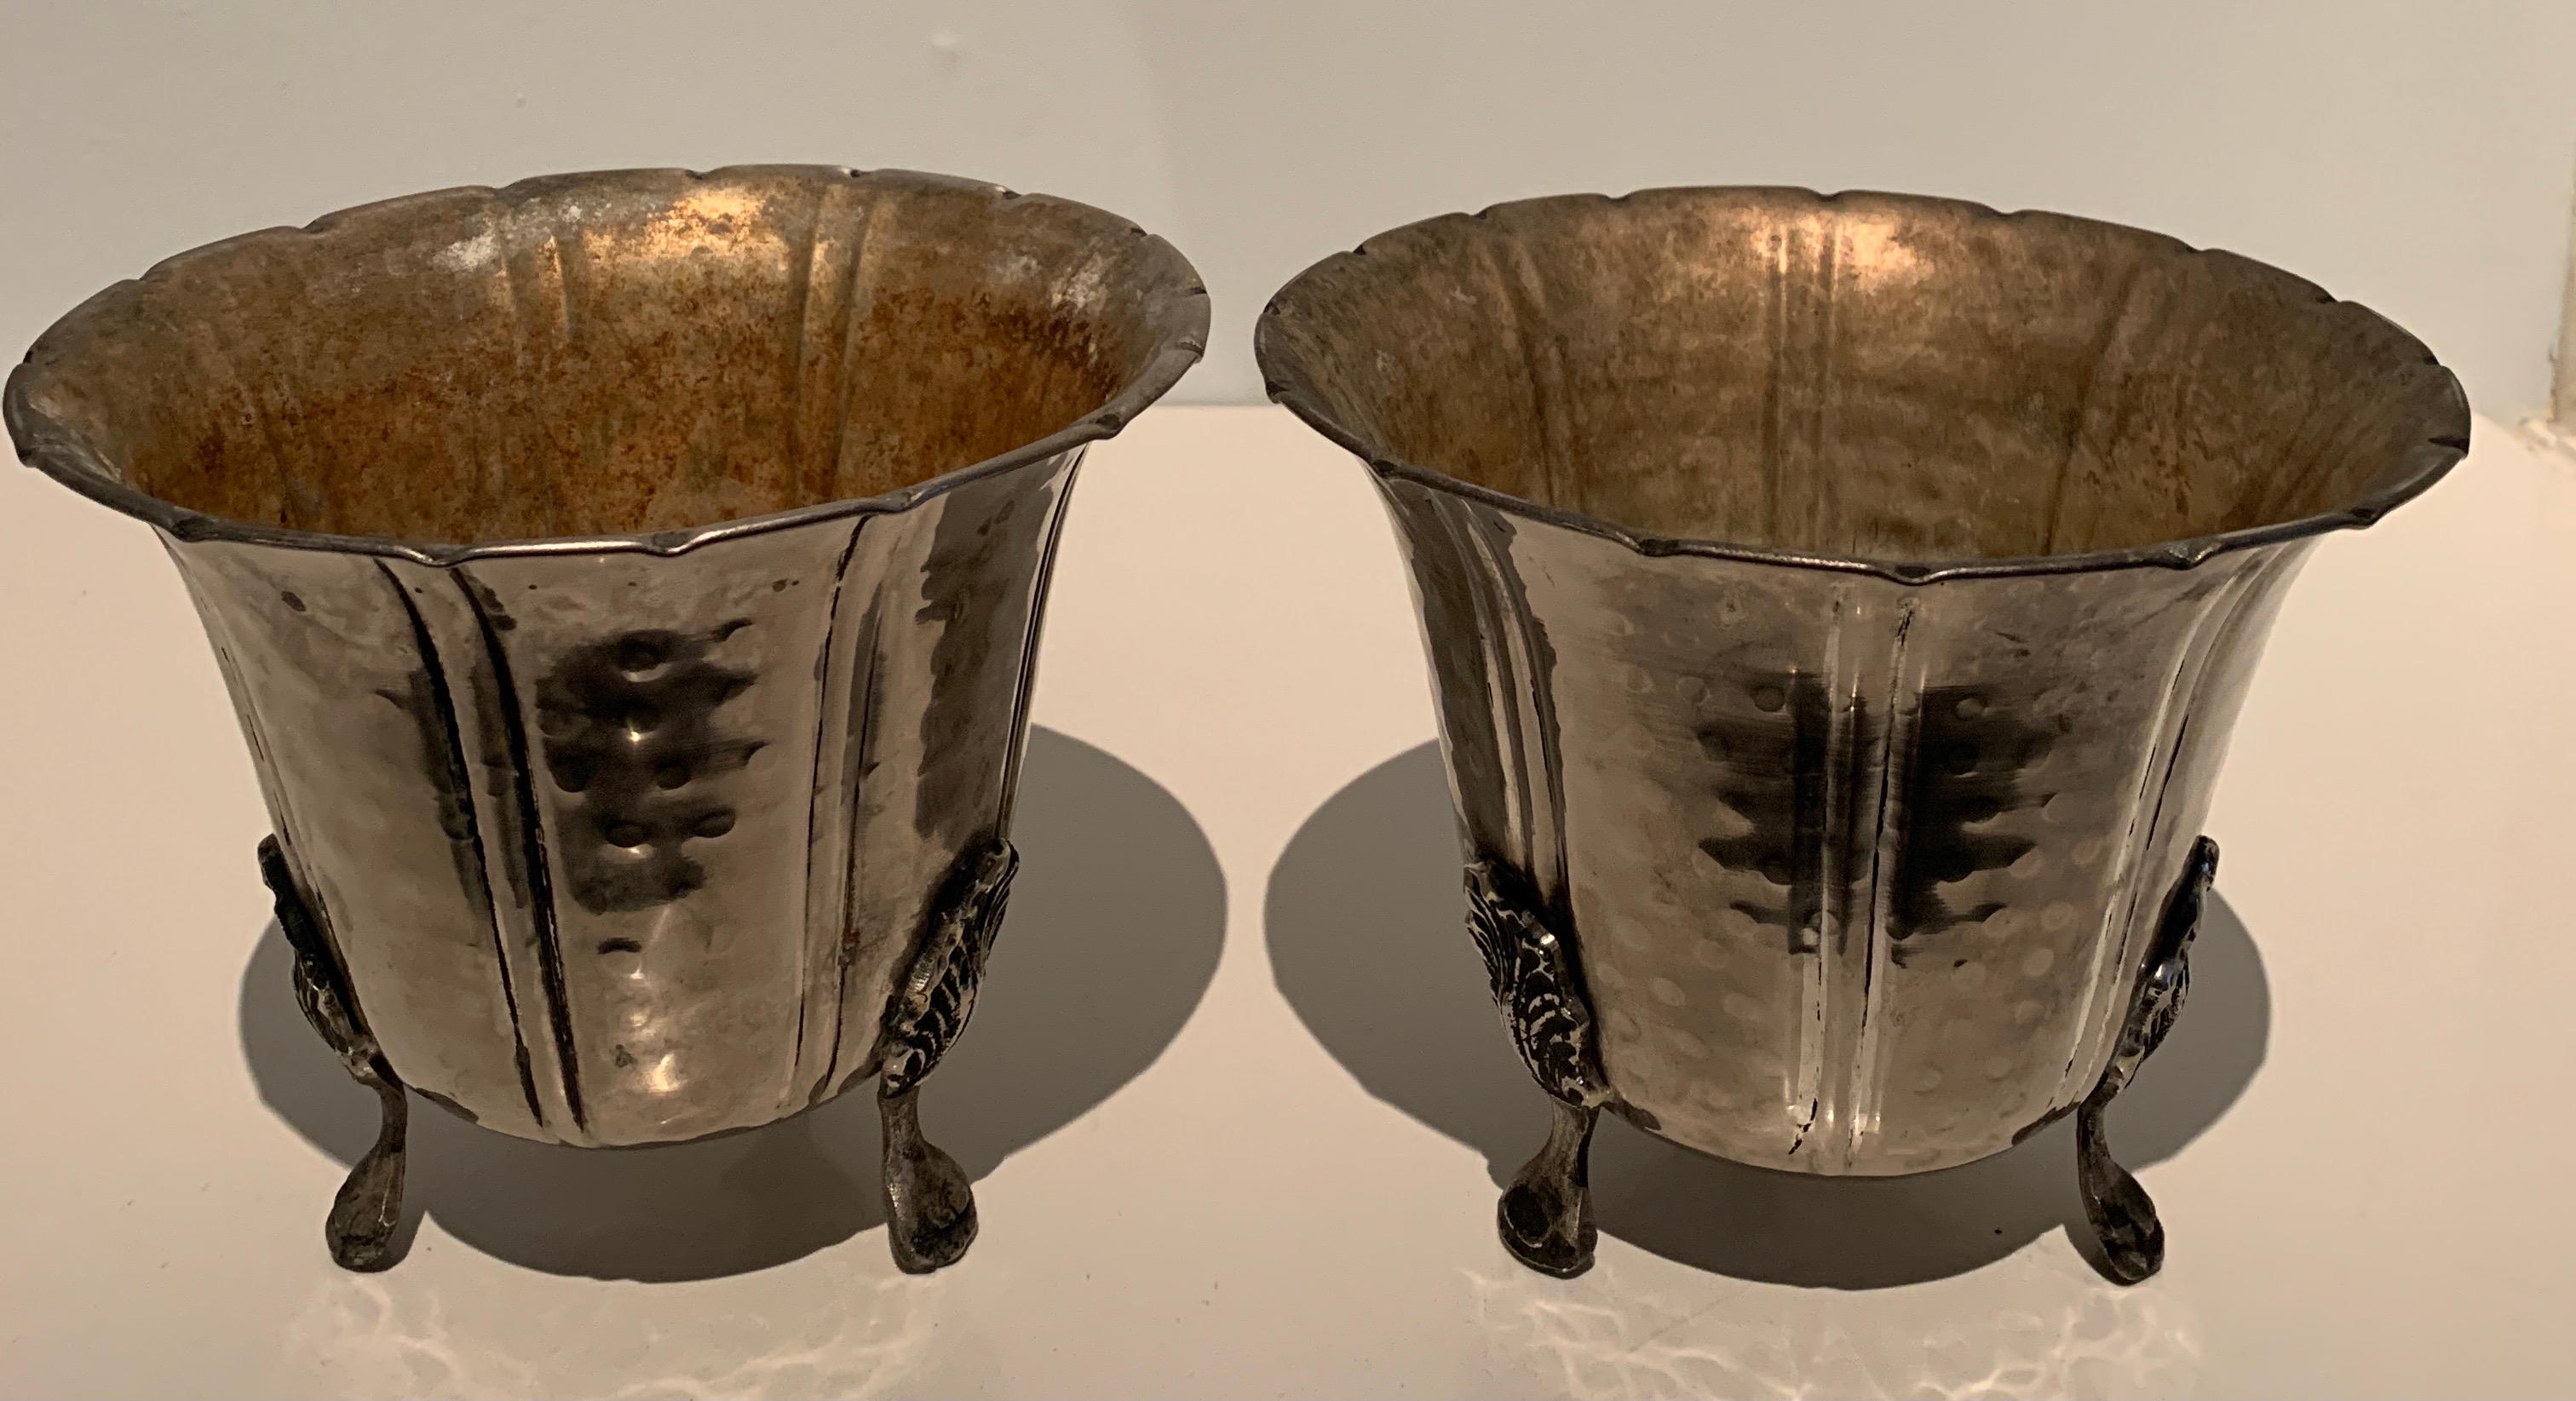 A Wonderful pair of French hammered silver planters. Simple yet dynamic with lovely feet to hold them up. The pair are a compliment to any console, mantle or place, indoor or out which deserve a flanked pair. Terrific for Orchids or house